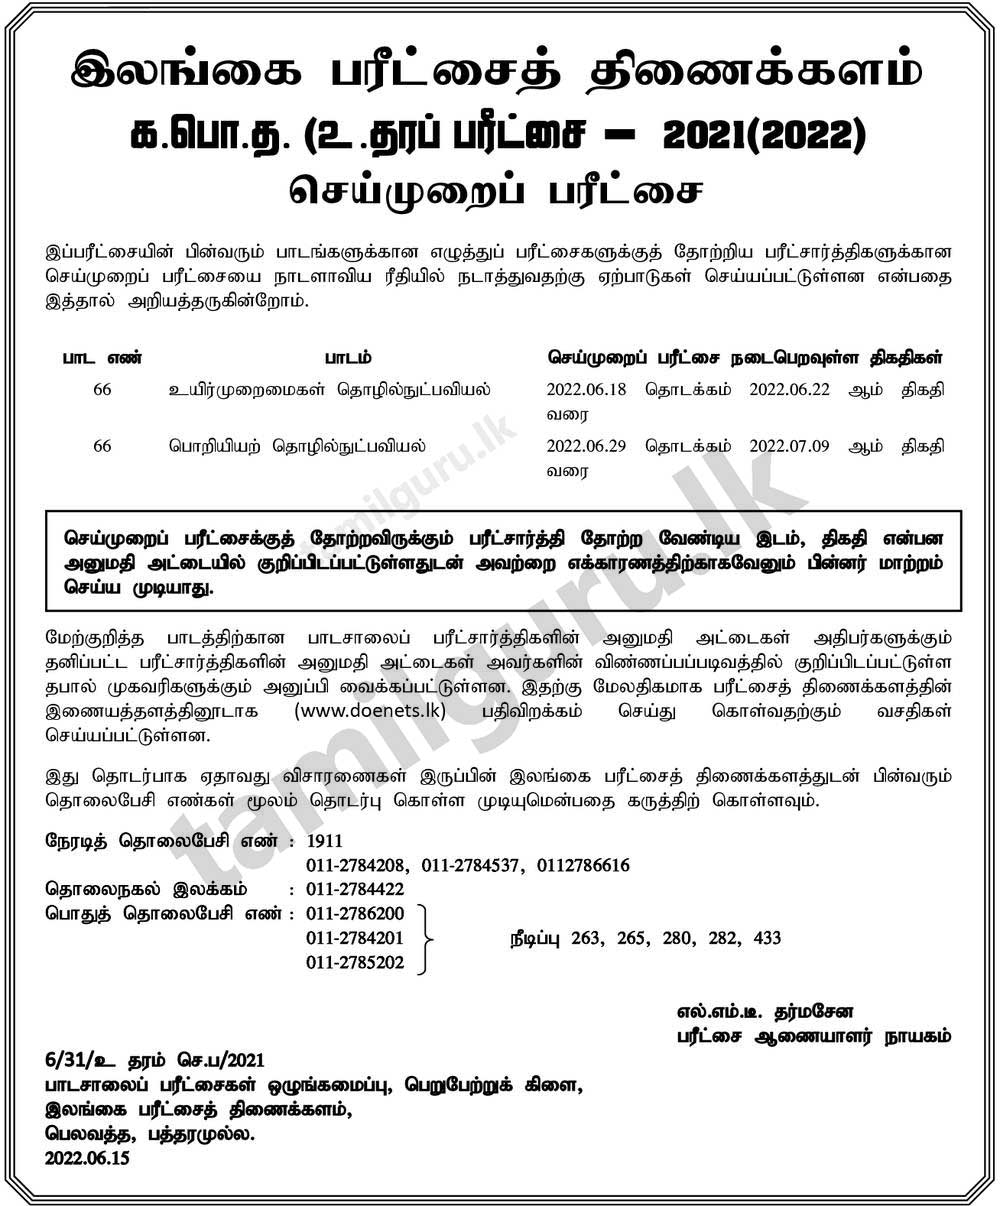 Practical Tests (Technology Stream) - G.C.E. A/L Examination 2021 (2022) (Details in Tamil)